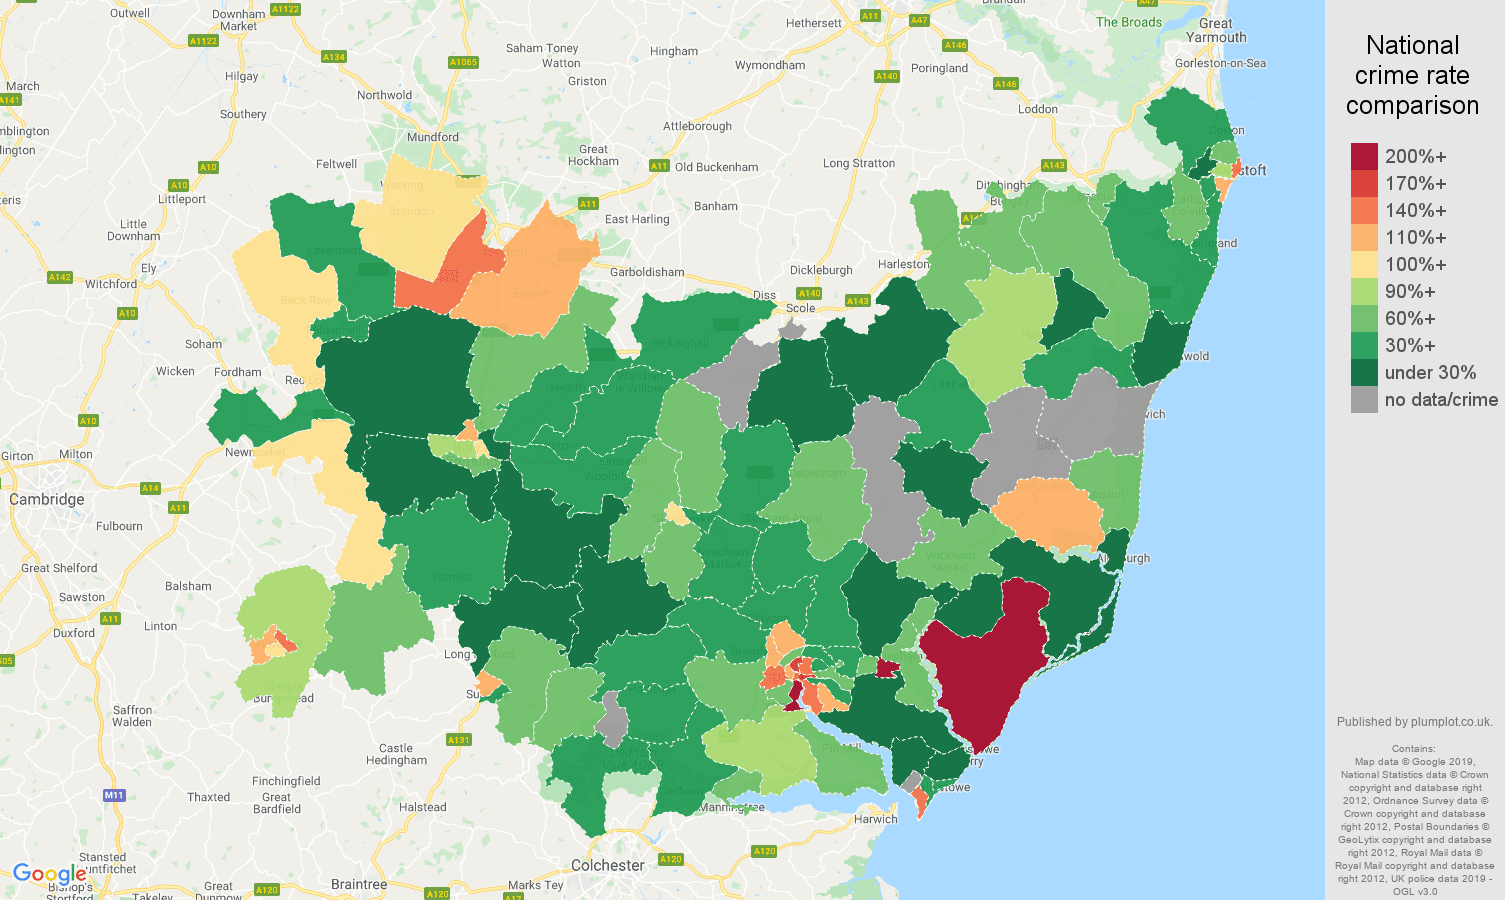 Suffolk other crime rate comparison map